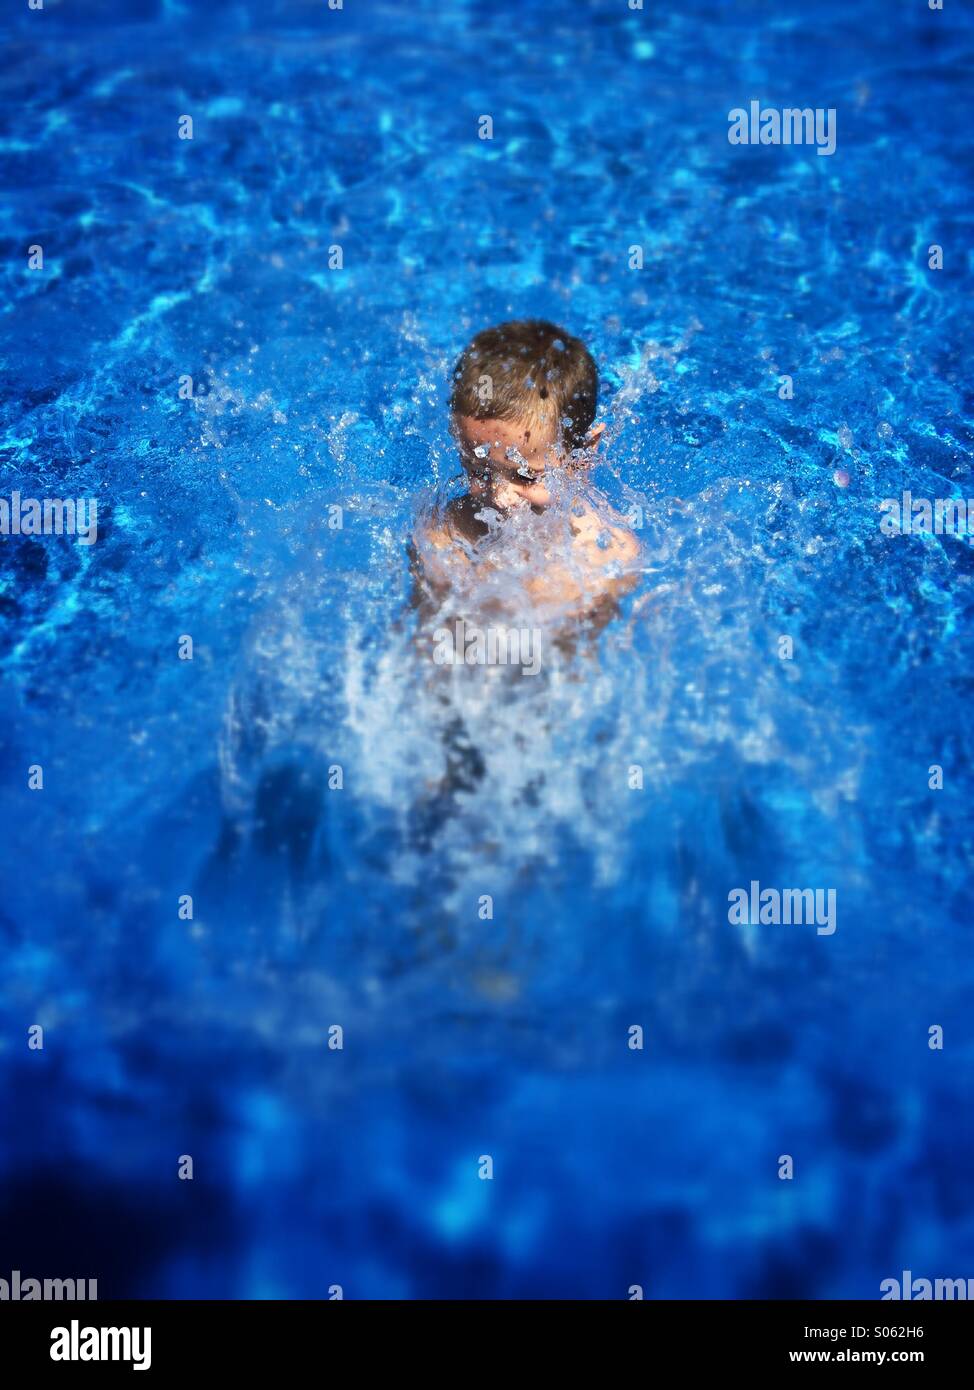 A young boy splashes in a deep blue pool Stock Photo